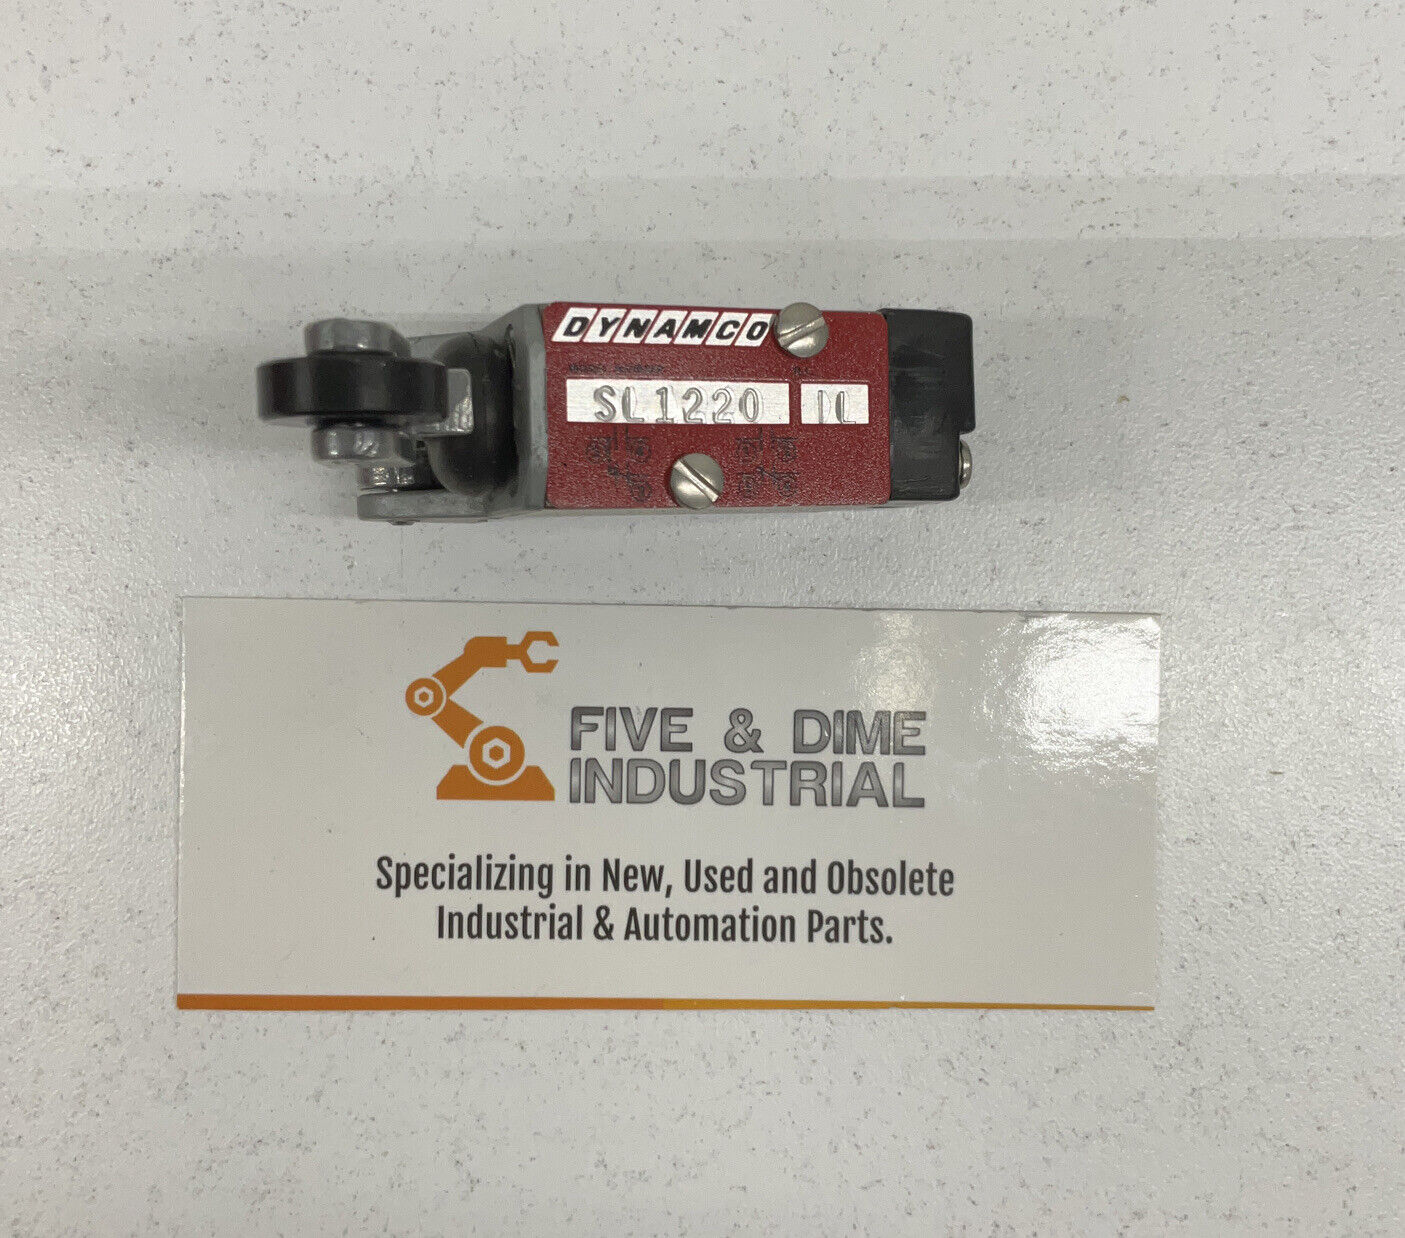 Dynamco SL1220 FK Roller Lever Actuated Pneumatic Limit Switch (RE132)